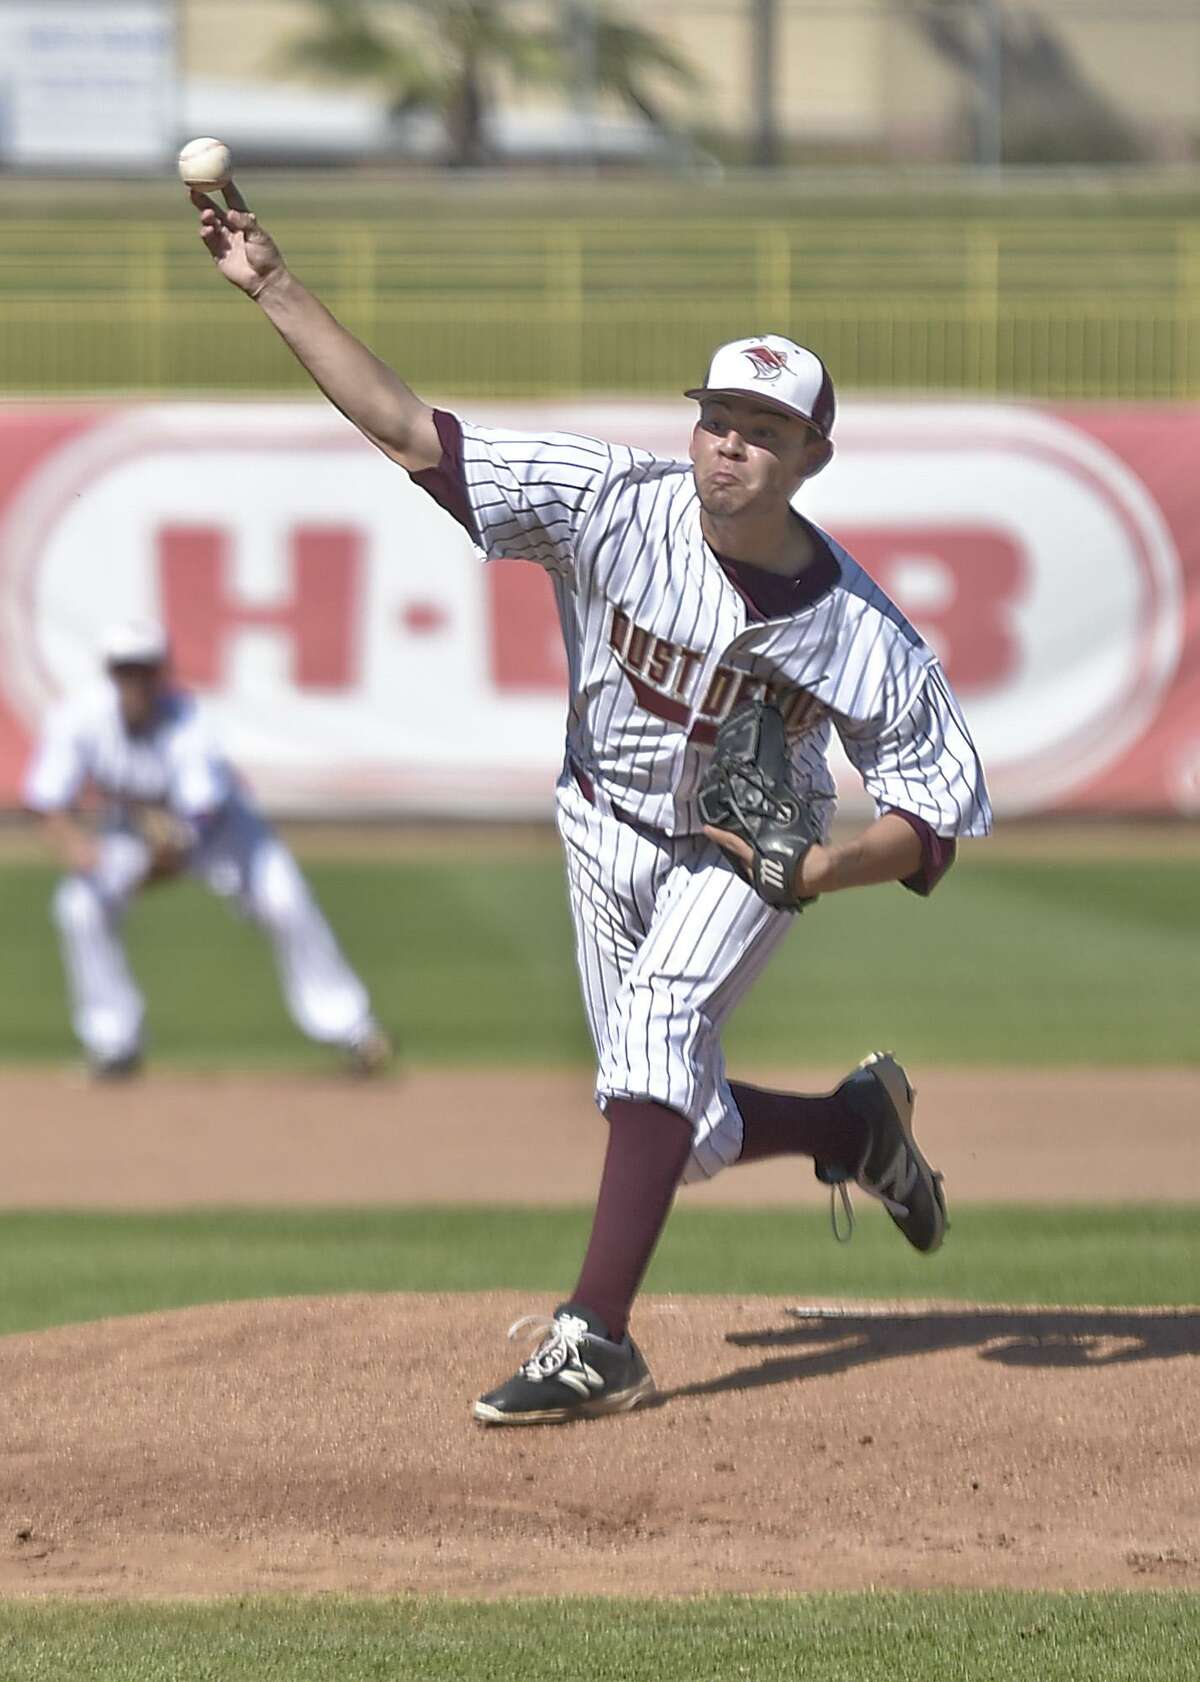 TAMIU pitcher Osvaldo Raya was named the Division II HERO Pitcher of the Week by HERO Sports Friday. The Dustdevils lost a pair of games Friday at No. 12 Angelo State.